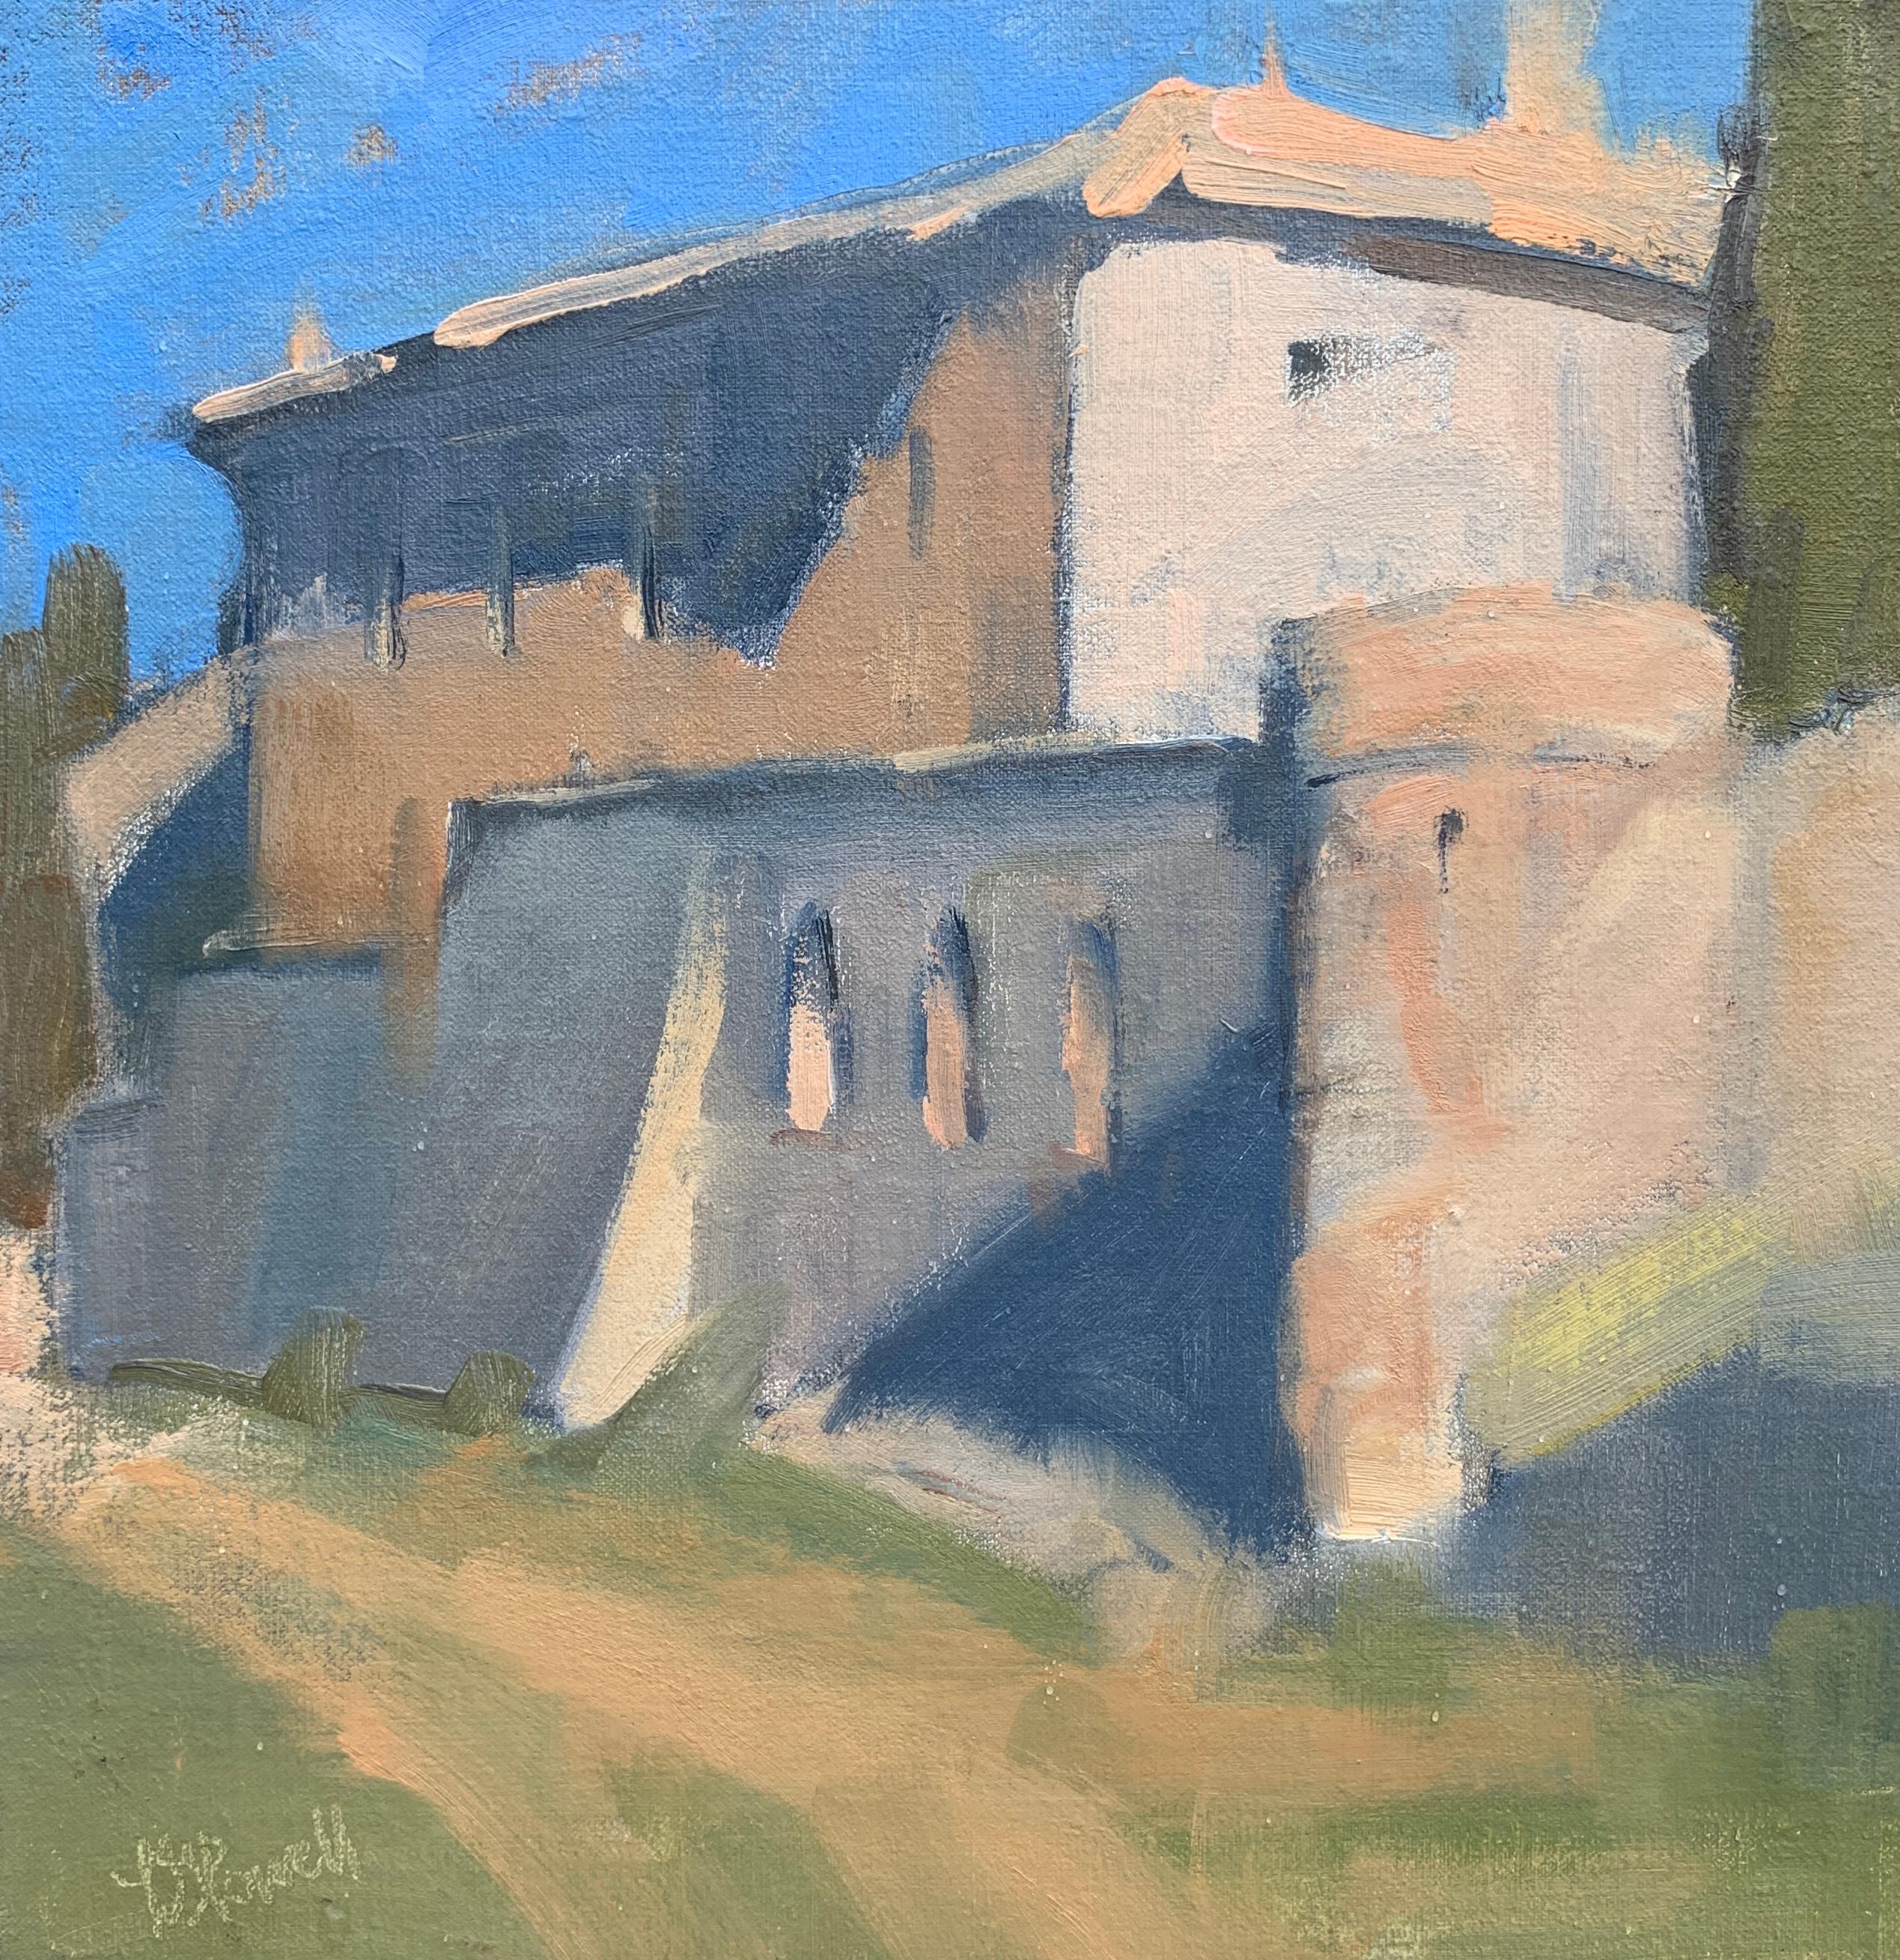 'St. Hilaire, Mid-Morning' is a small Post-Impressionist oil on linen mounted on board painting created by American artist Lesley Powell in 2019. Featuring a palette made of blue, grey, pink and green tones, the painting features the town of